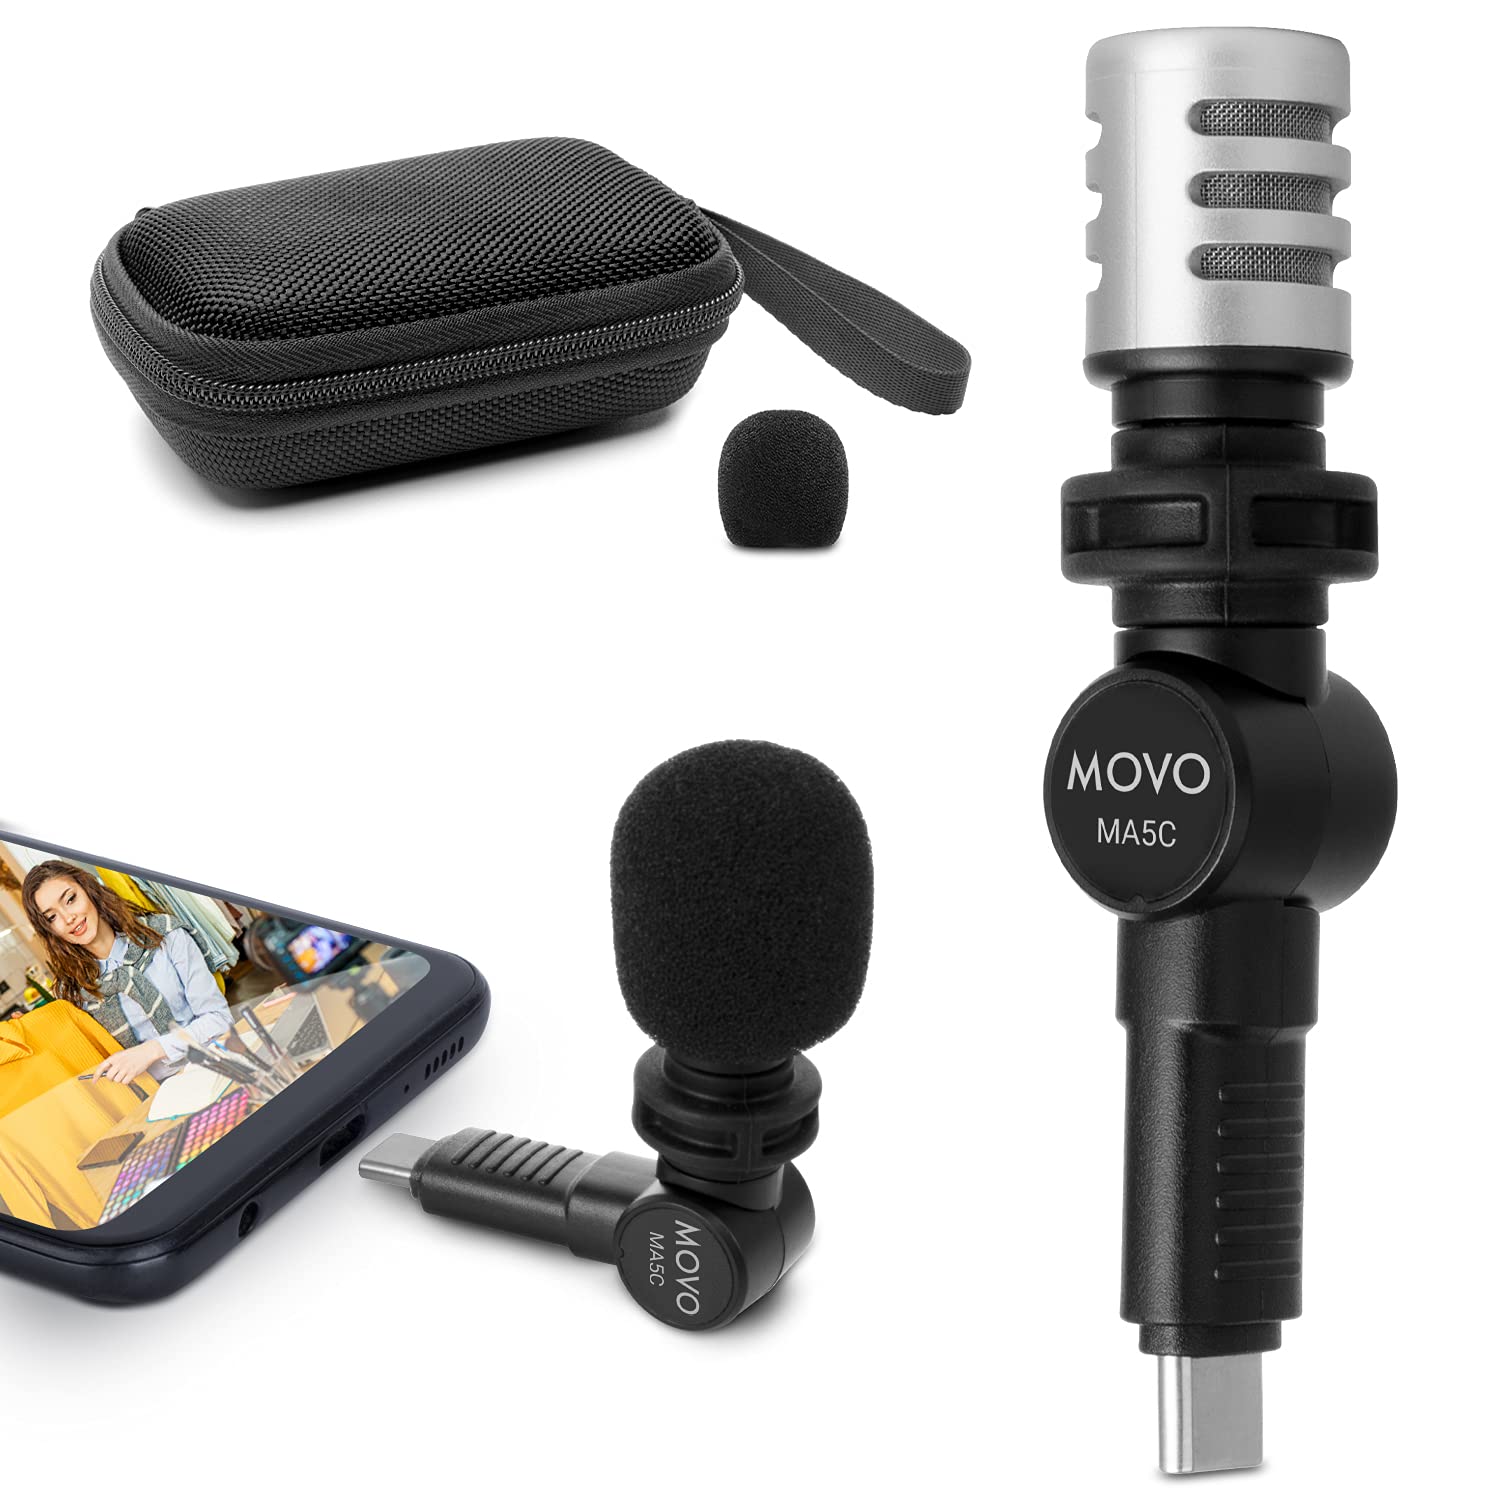 Movo MA5C External USB C Microphone for Type-C Devices - Condenser Shotgun Mic for Video Recording, Voiceover, Interview, Travel, Vlogging, Youtube  - Acceptable